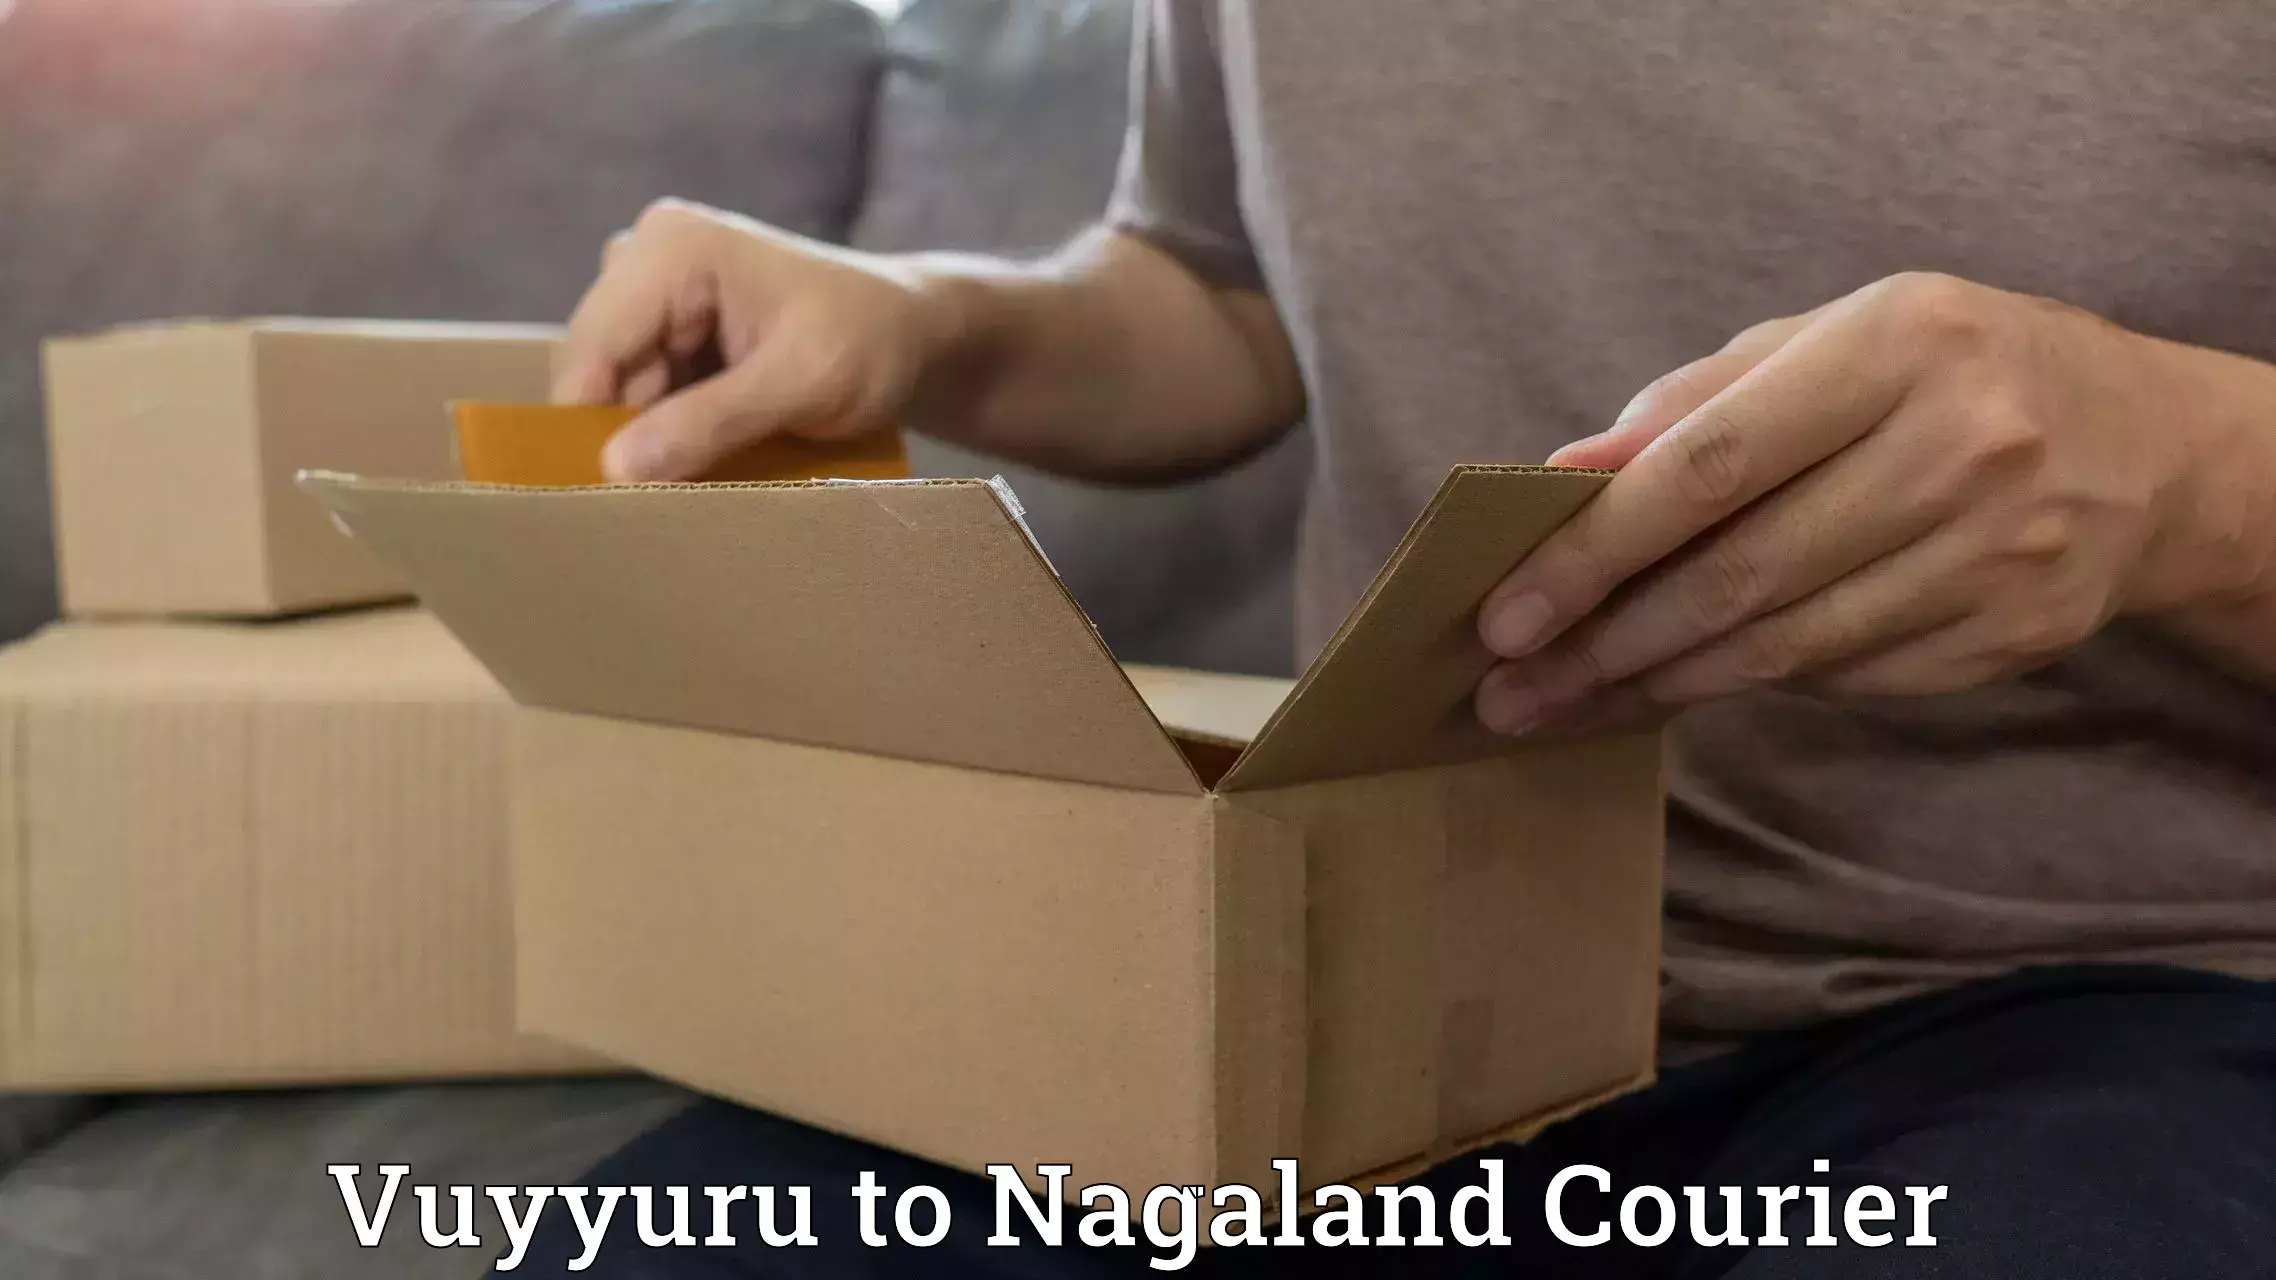 Sustainable delivery practices Vuyyuru to Nagaland